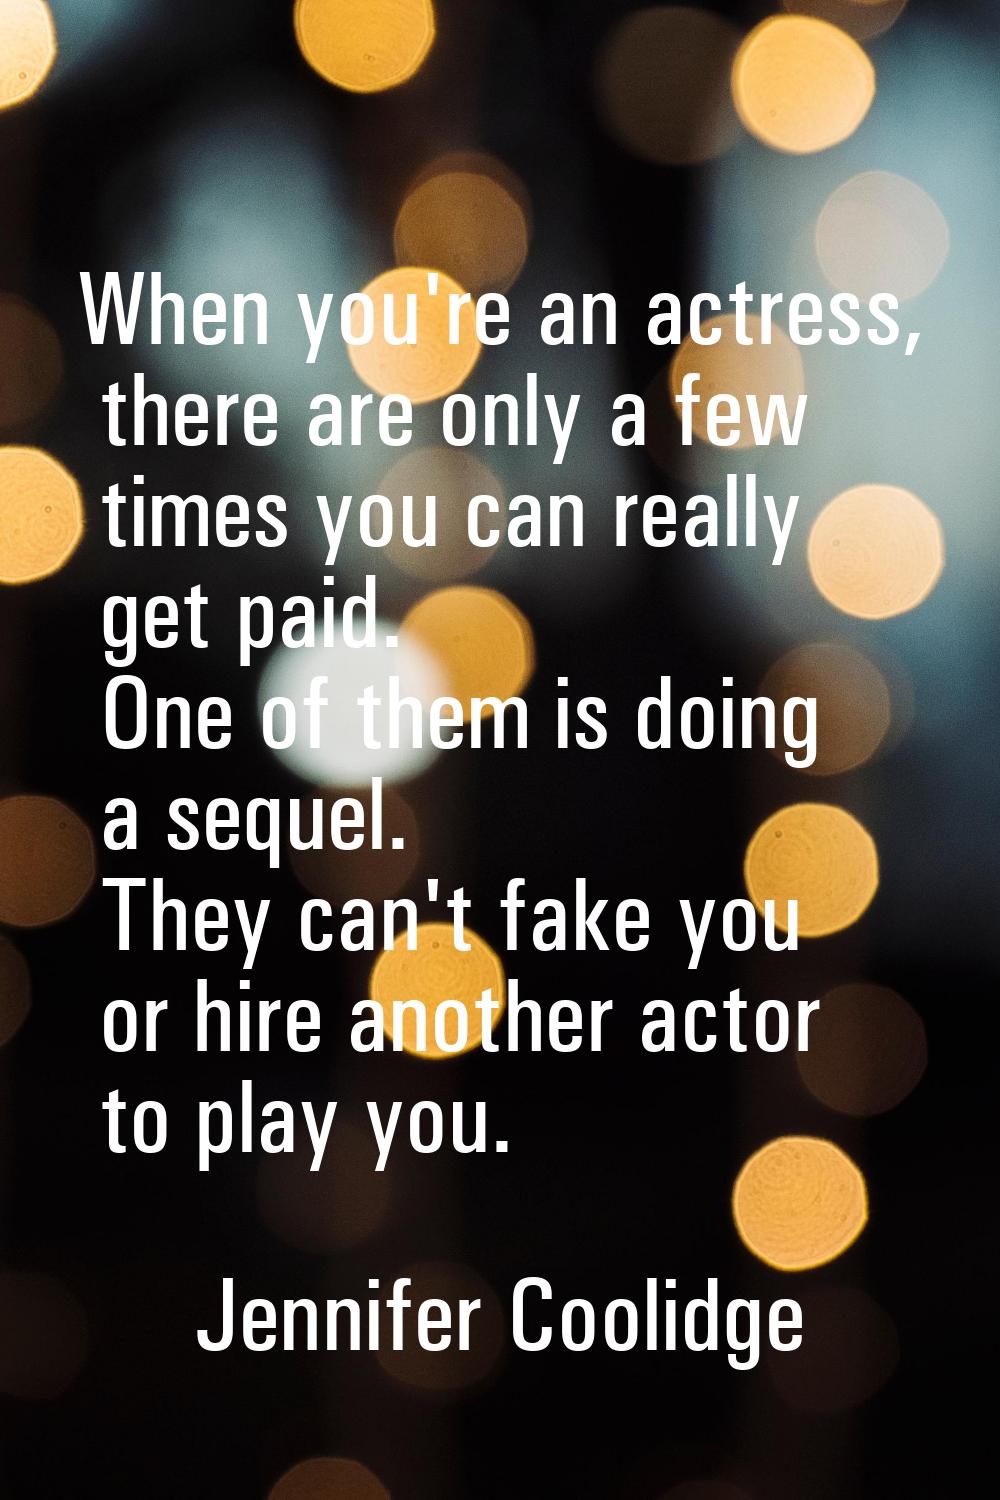 When you're an actress, there are only a few times you can really get paid. One of them is doing a 